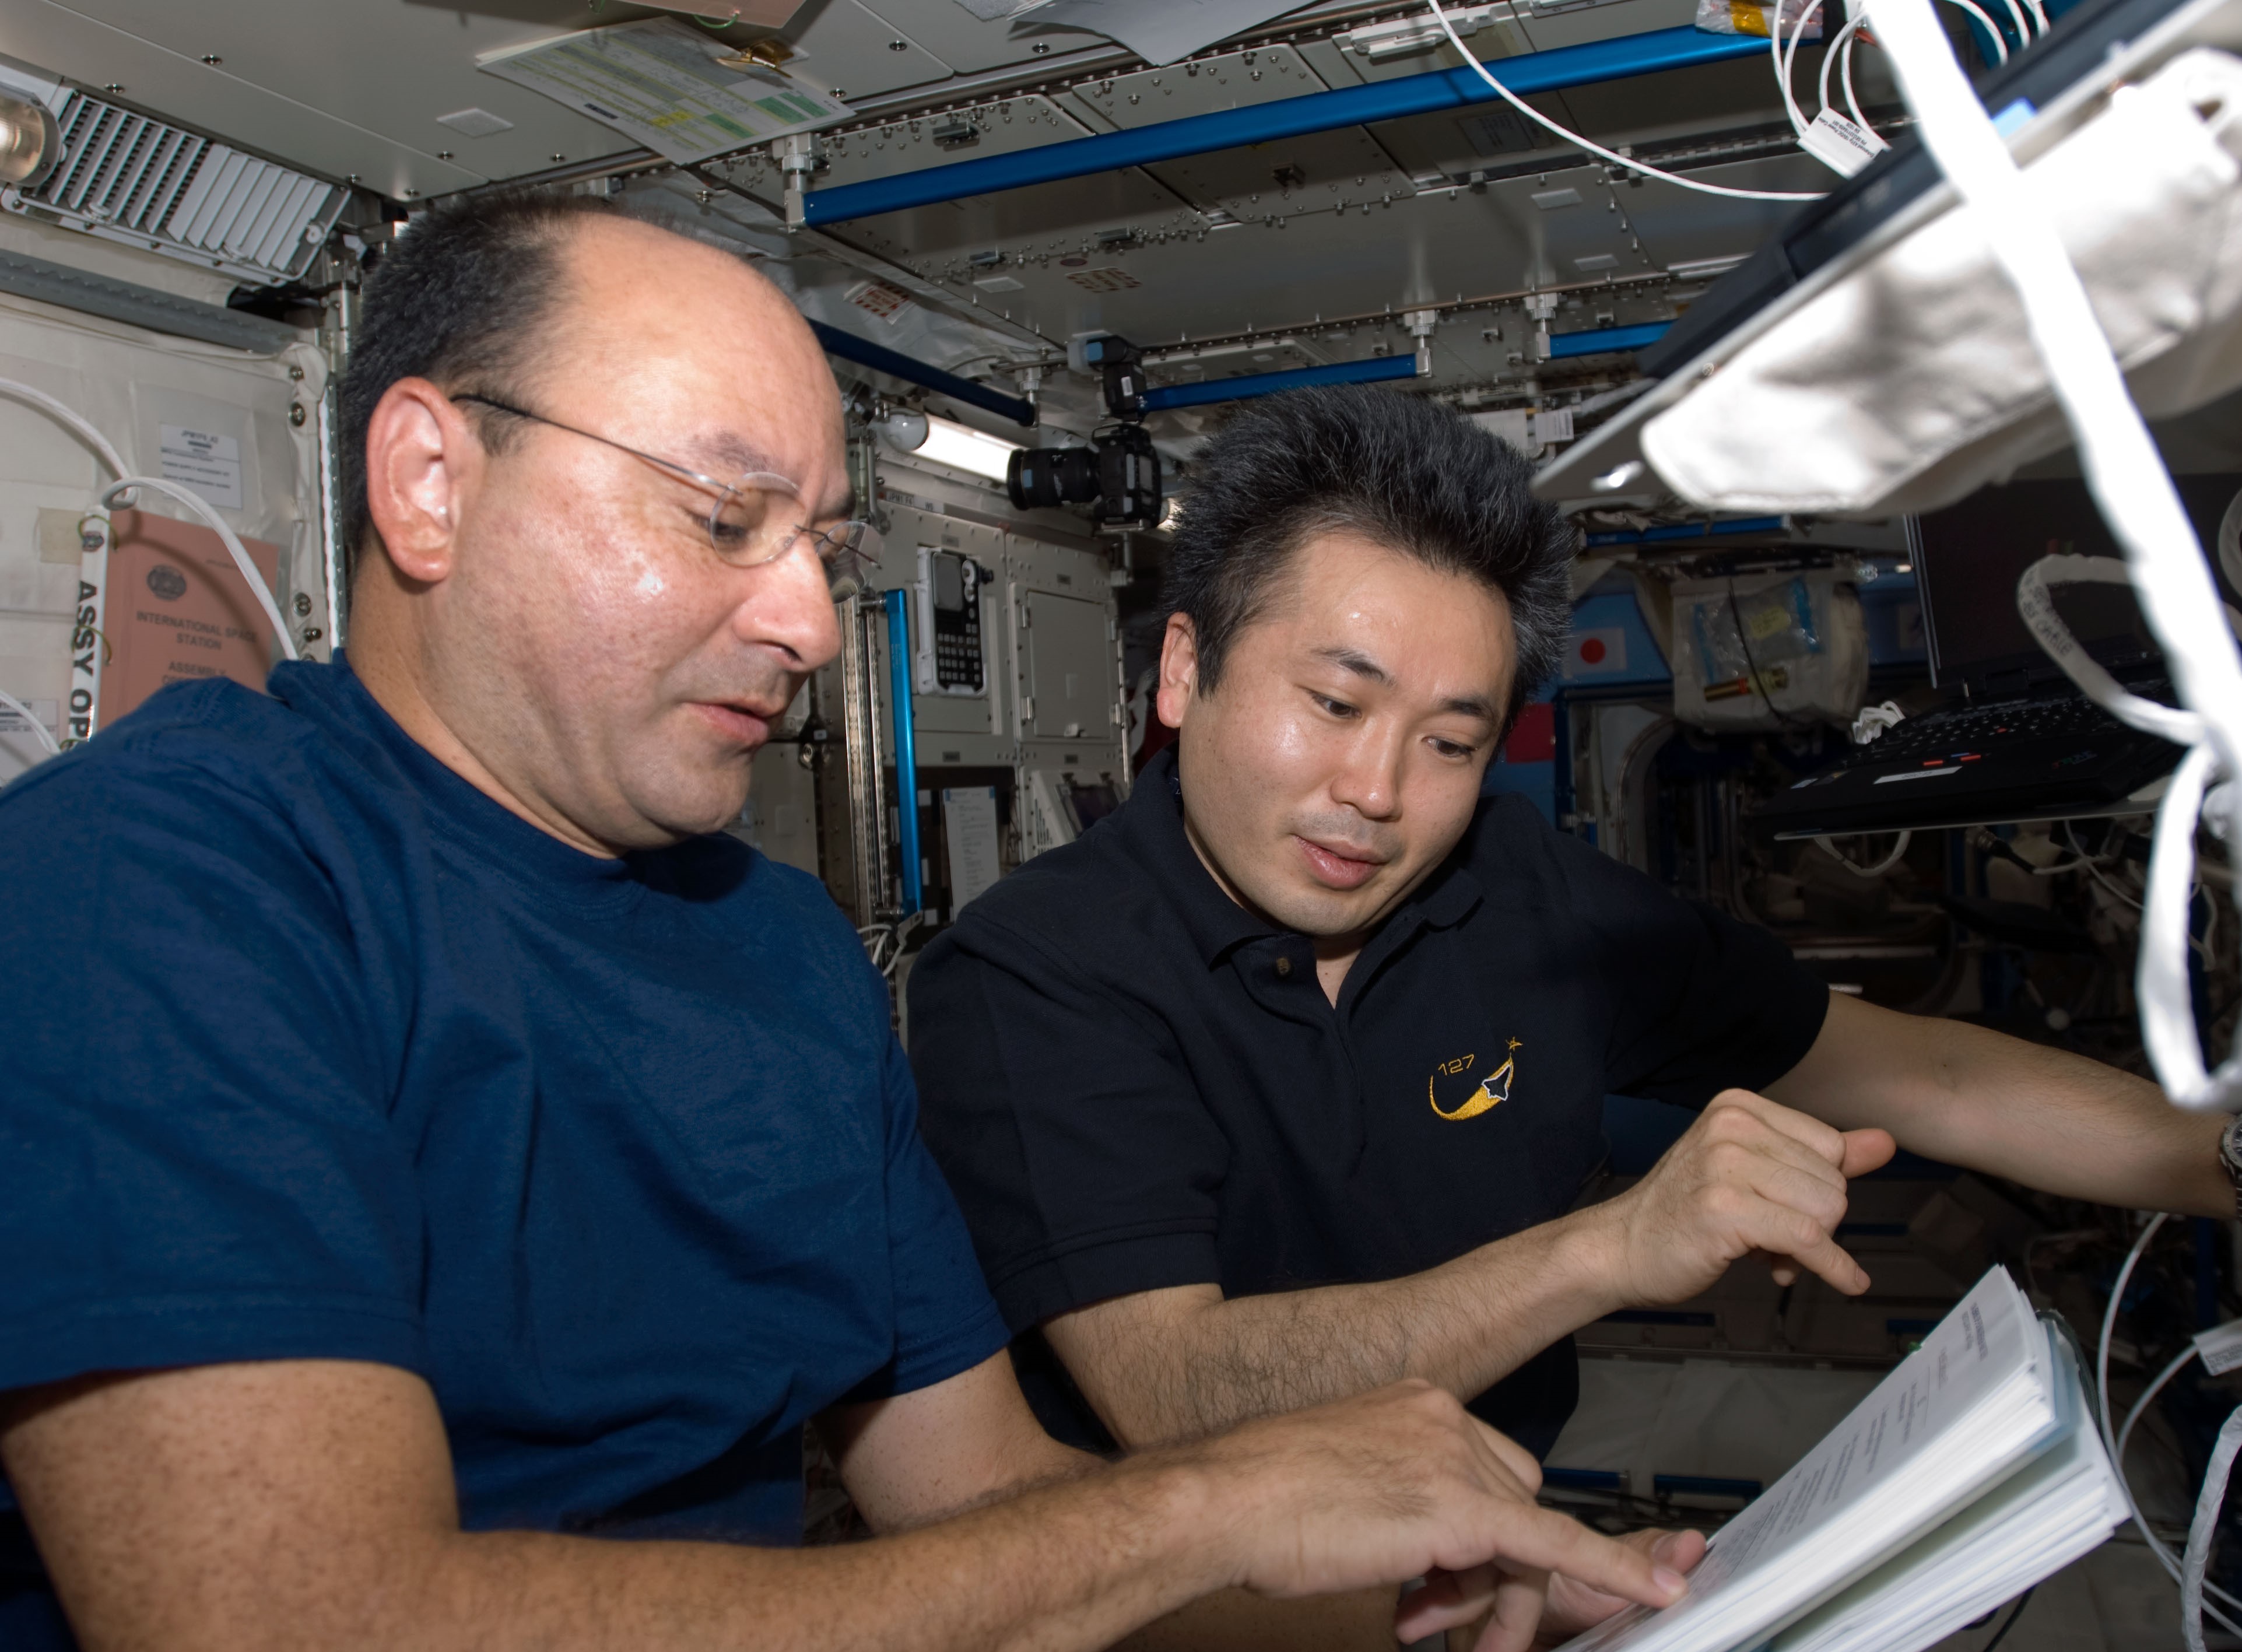 Mark J. Polansky, left, and Koichi Wakata of the Japan Aerospace Exploration Agency, one of the three teams that transferred the EF payloads using Kibo’s robotic arm